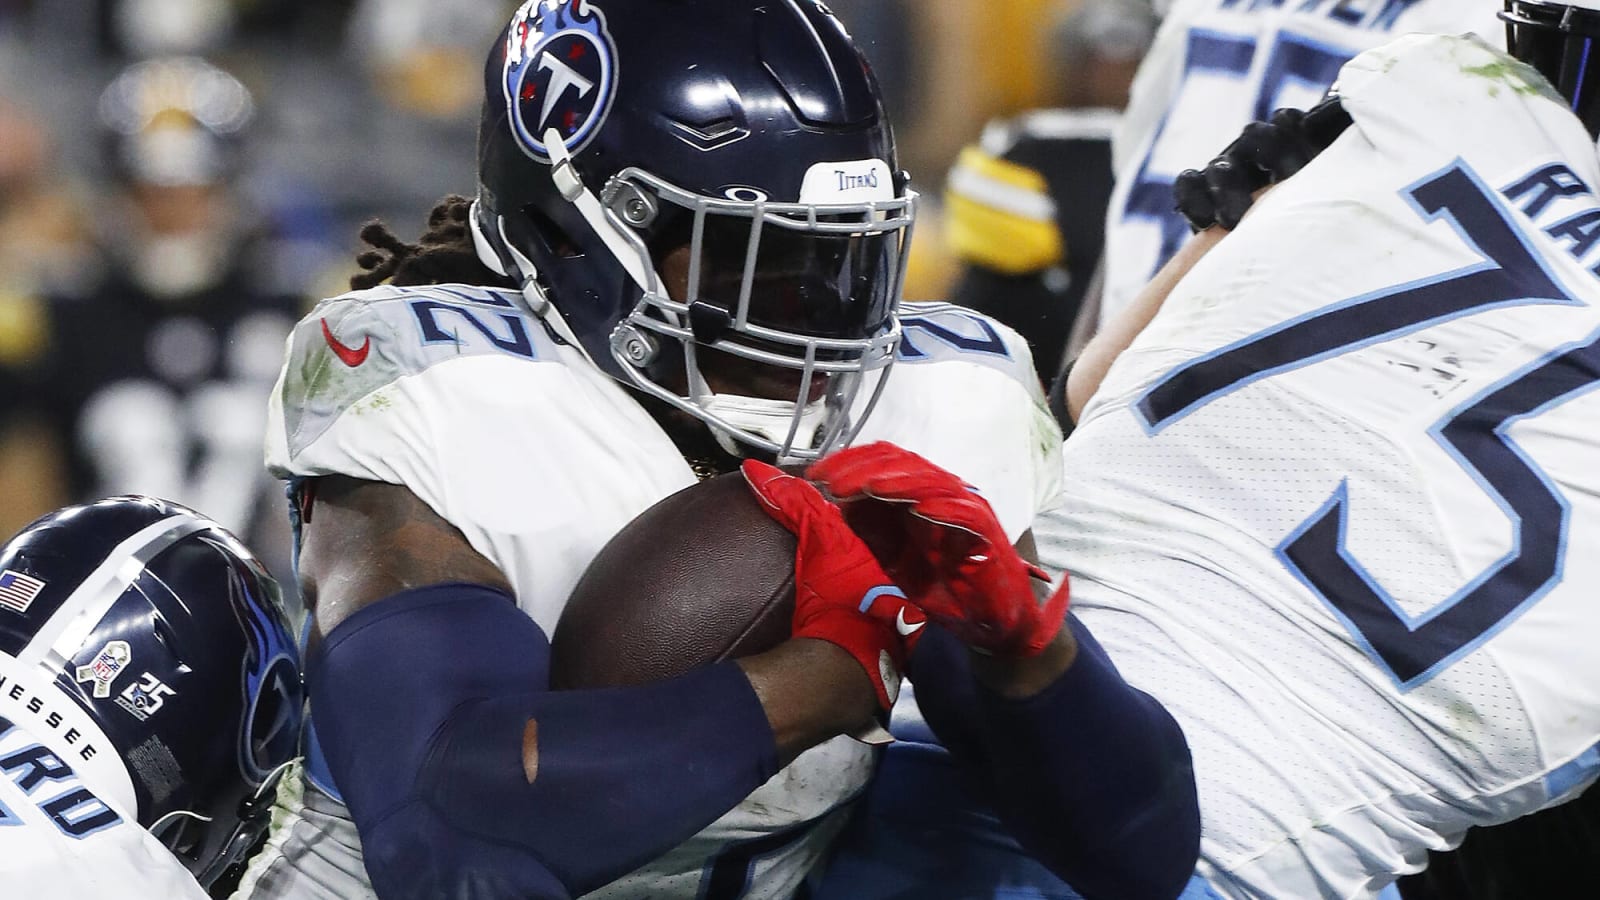 Look of the Day for Monday, Dec. 11: Will Derrick Henry make a difference for Titans?